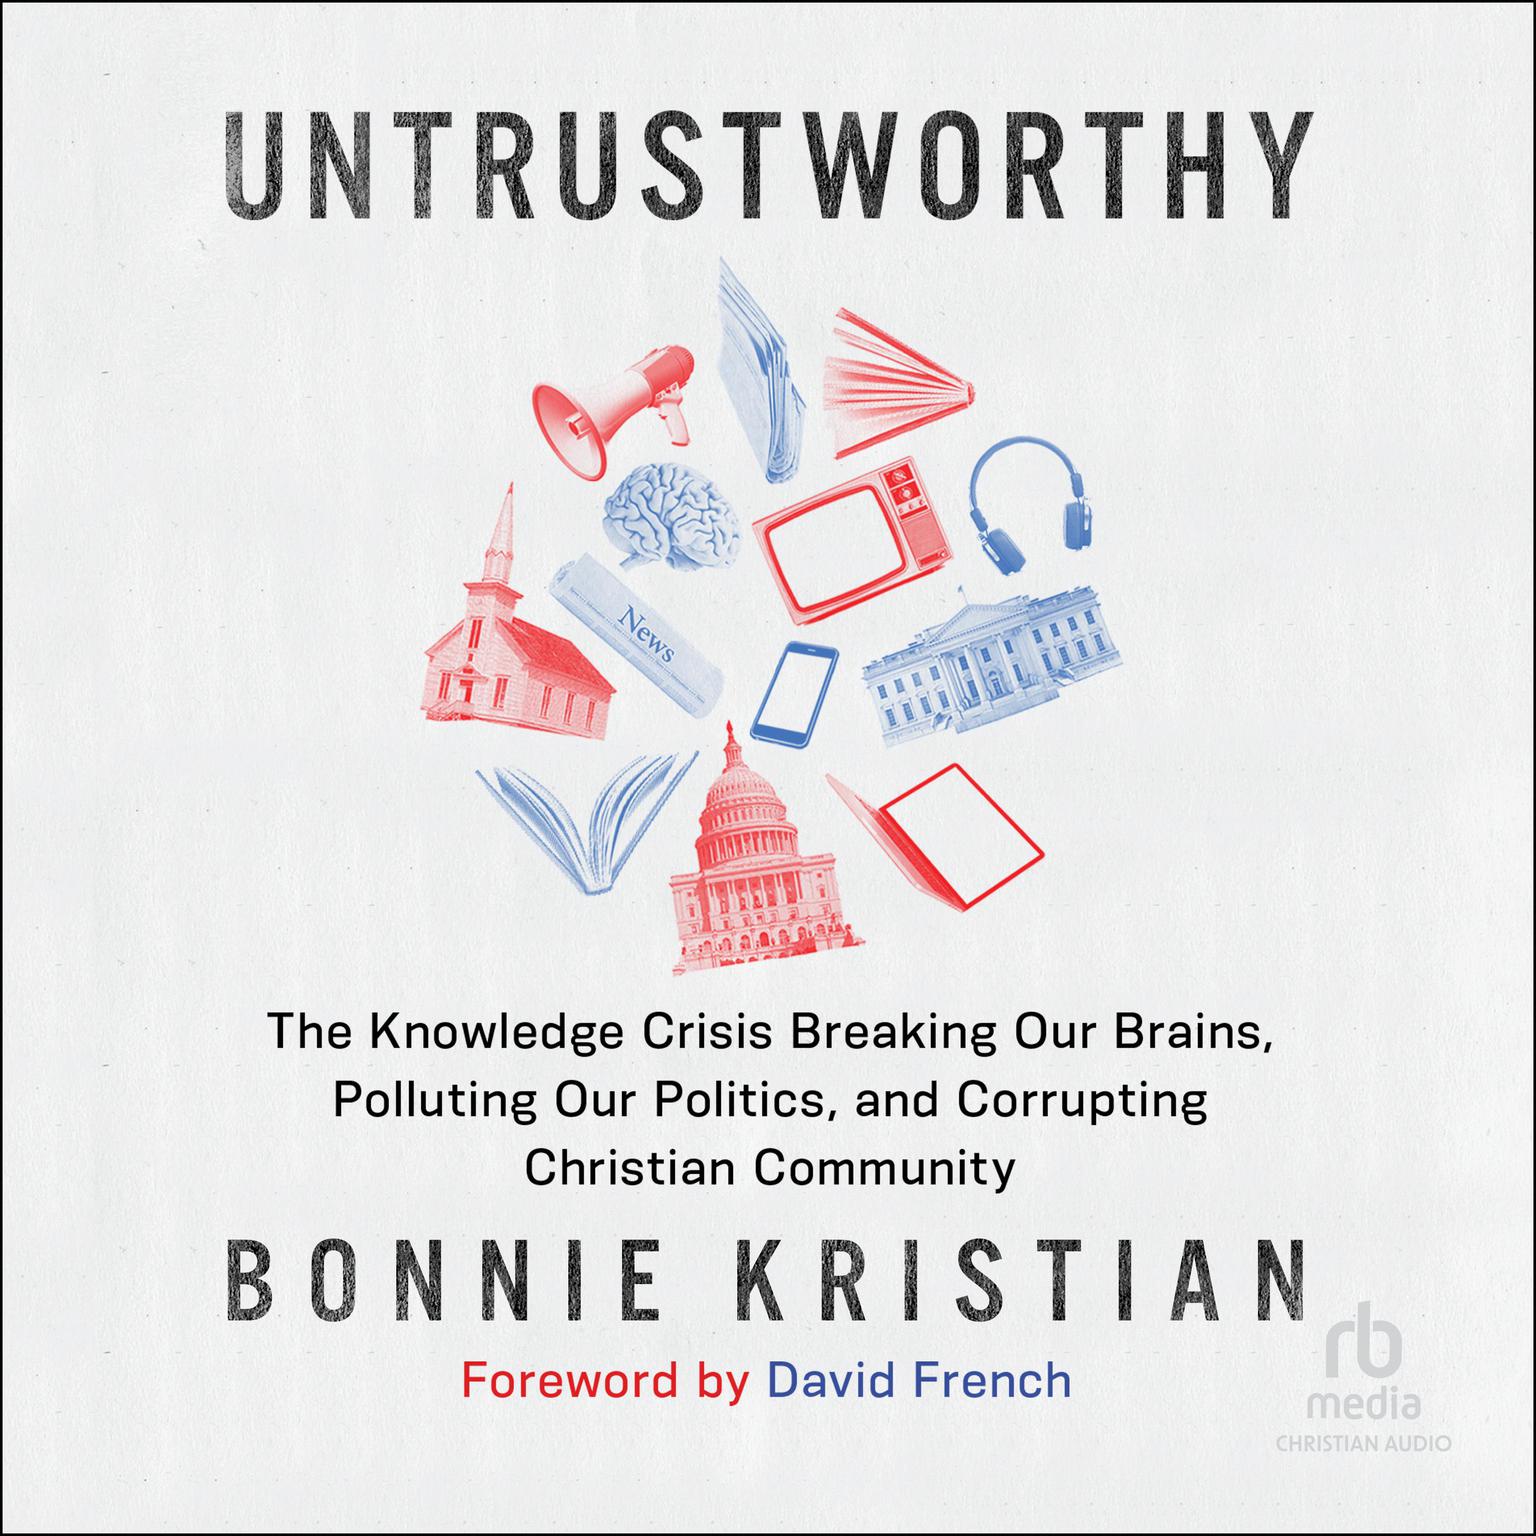 Untrustworthy: The Knowledge Crisis Breaking Our Brains, Polluting Our Politics, and Corrupting Christian Community Audiobook, by Bonnie Kristian